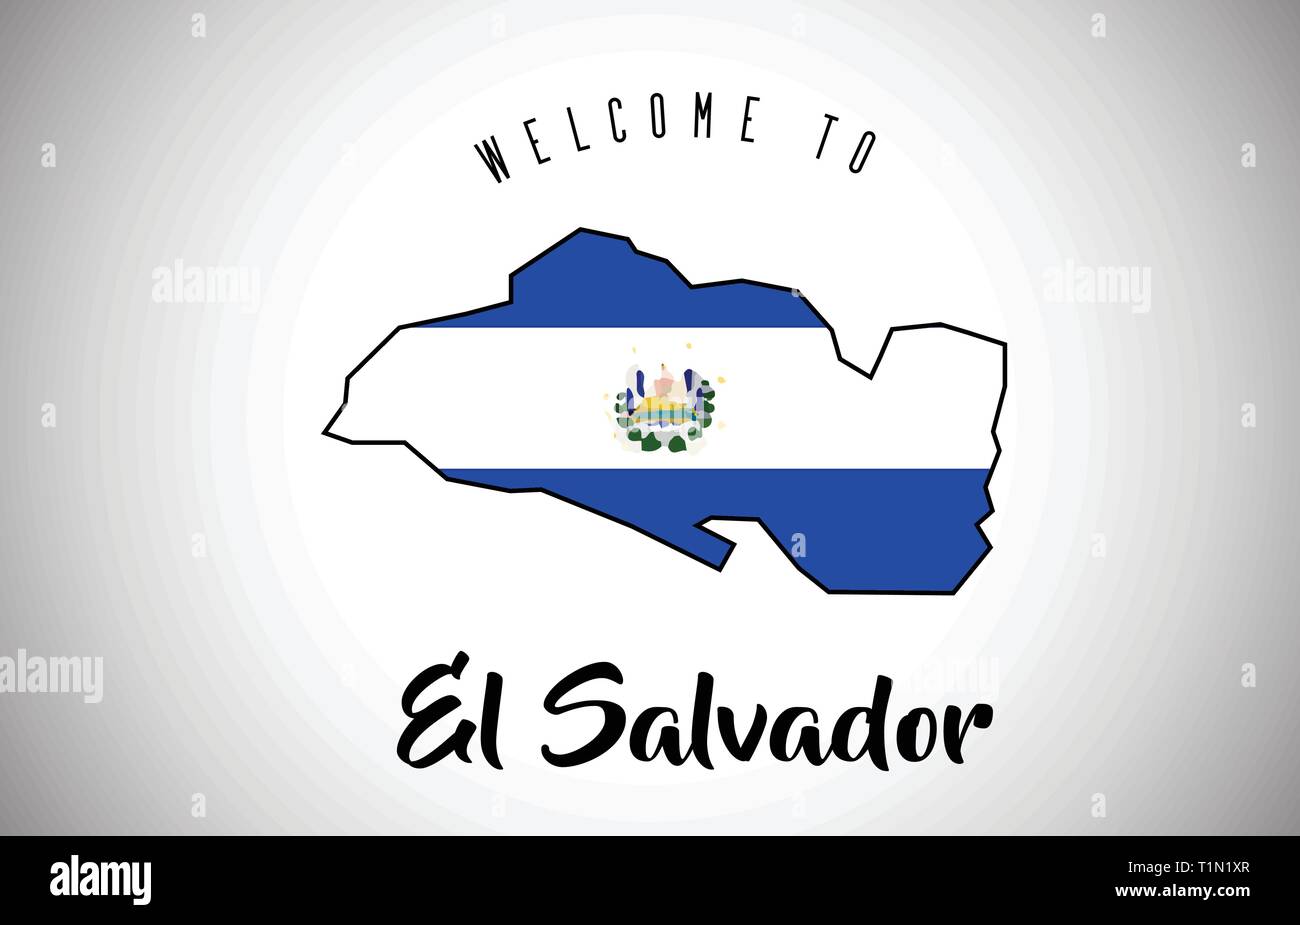 El Salvador Welcome to Text and Country flag inside Country Border Map. Uruguay map with national flag Vector Design Illustration. Stock Vector